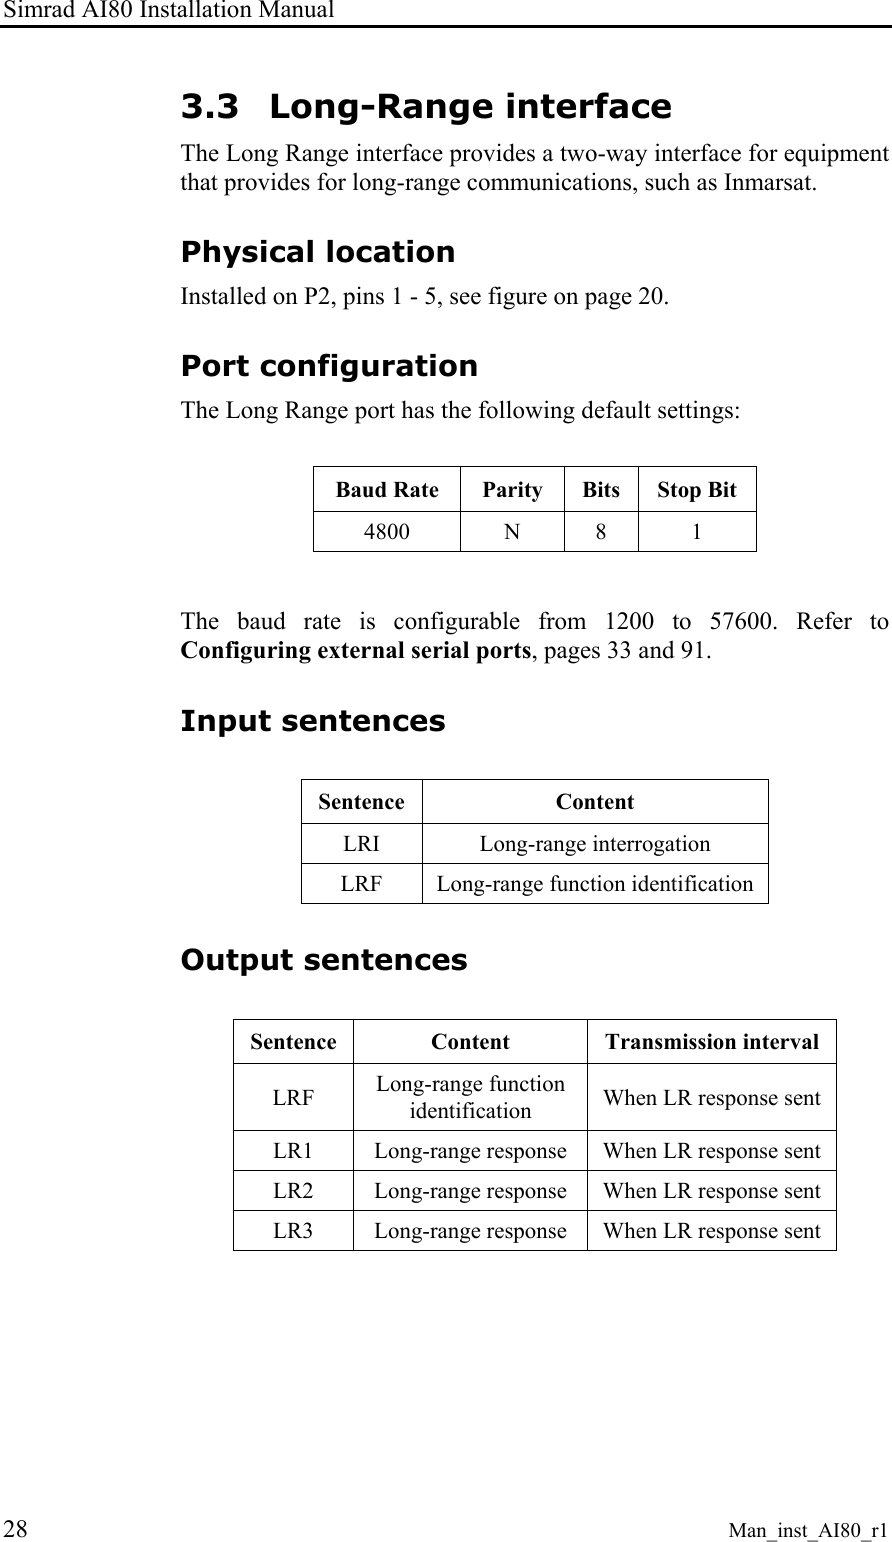 Simrad AI80 Installation Manual 28 Man_inst_AI80_r1 3.3 Long-Range interface The Long Range interface provides a two-way interface for equipment that provides for long-range communications, such as Inmarsat. Physical location Installed on P2, pins 1 - 5, see figure on page 20. Port configuration The Long Range port has the following default settings:  Baud Rate  Parity  Bits  Stop Bit 4800 N 8 1  The baud rate is configurable from 1200 to 57600. Refer to Configuring external serial ports, pages 33 and 91. Input sentences  Sentence  Content LRI Long-range interrogation LRF  Long-range function identification Output sentences  Sentence  Content  Transmission interval LRF  Long-range function identification  When LR response sent LR1  Long-range response  When LR response sent LR2  Long-range response  When LR response sent LR3  Long-range response  When LR response sent  